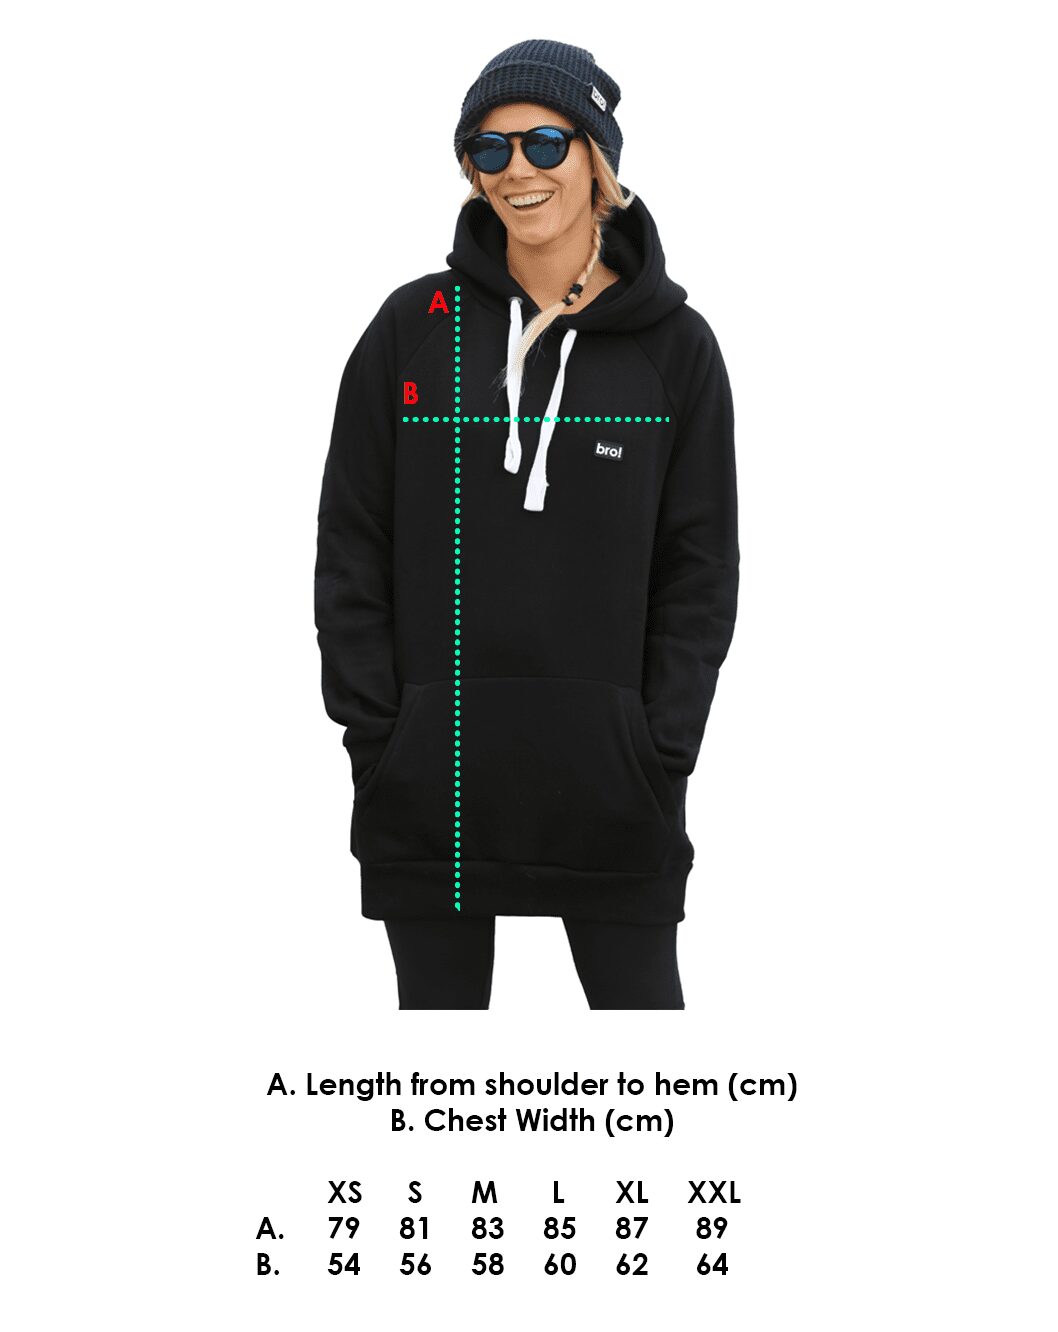 bro! park edition hoodie size guide